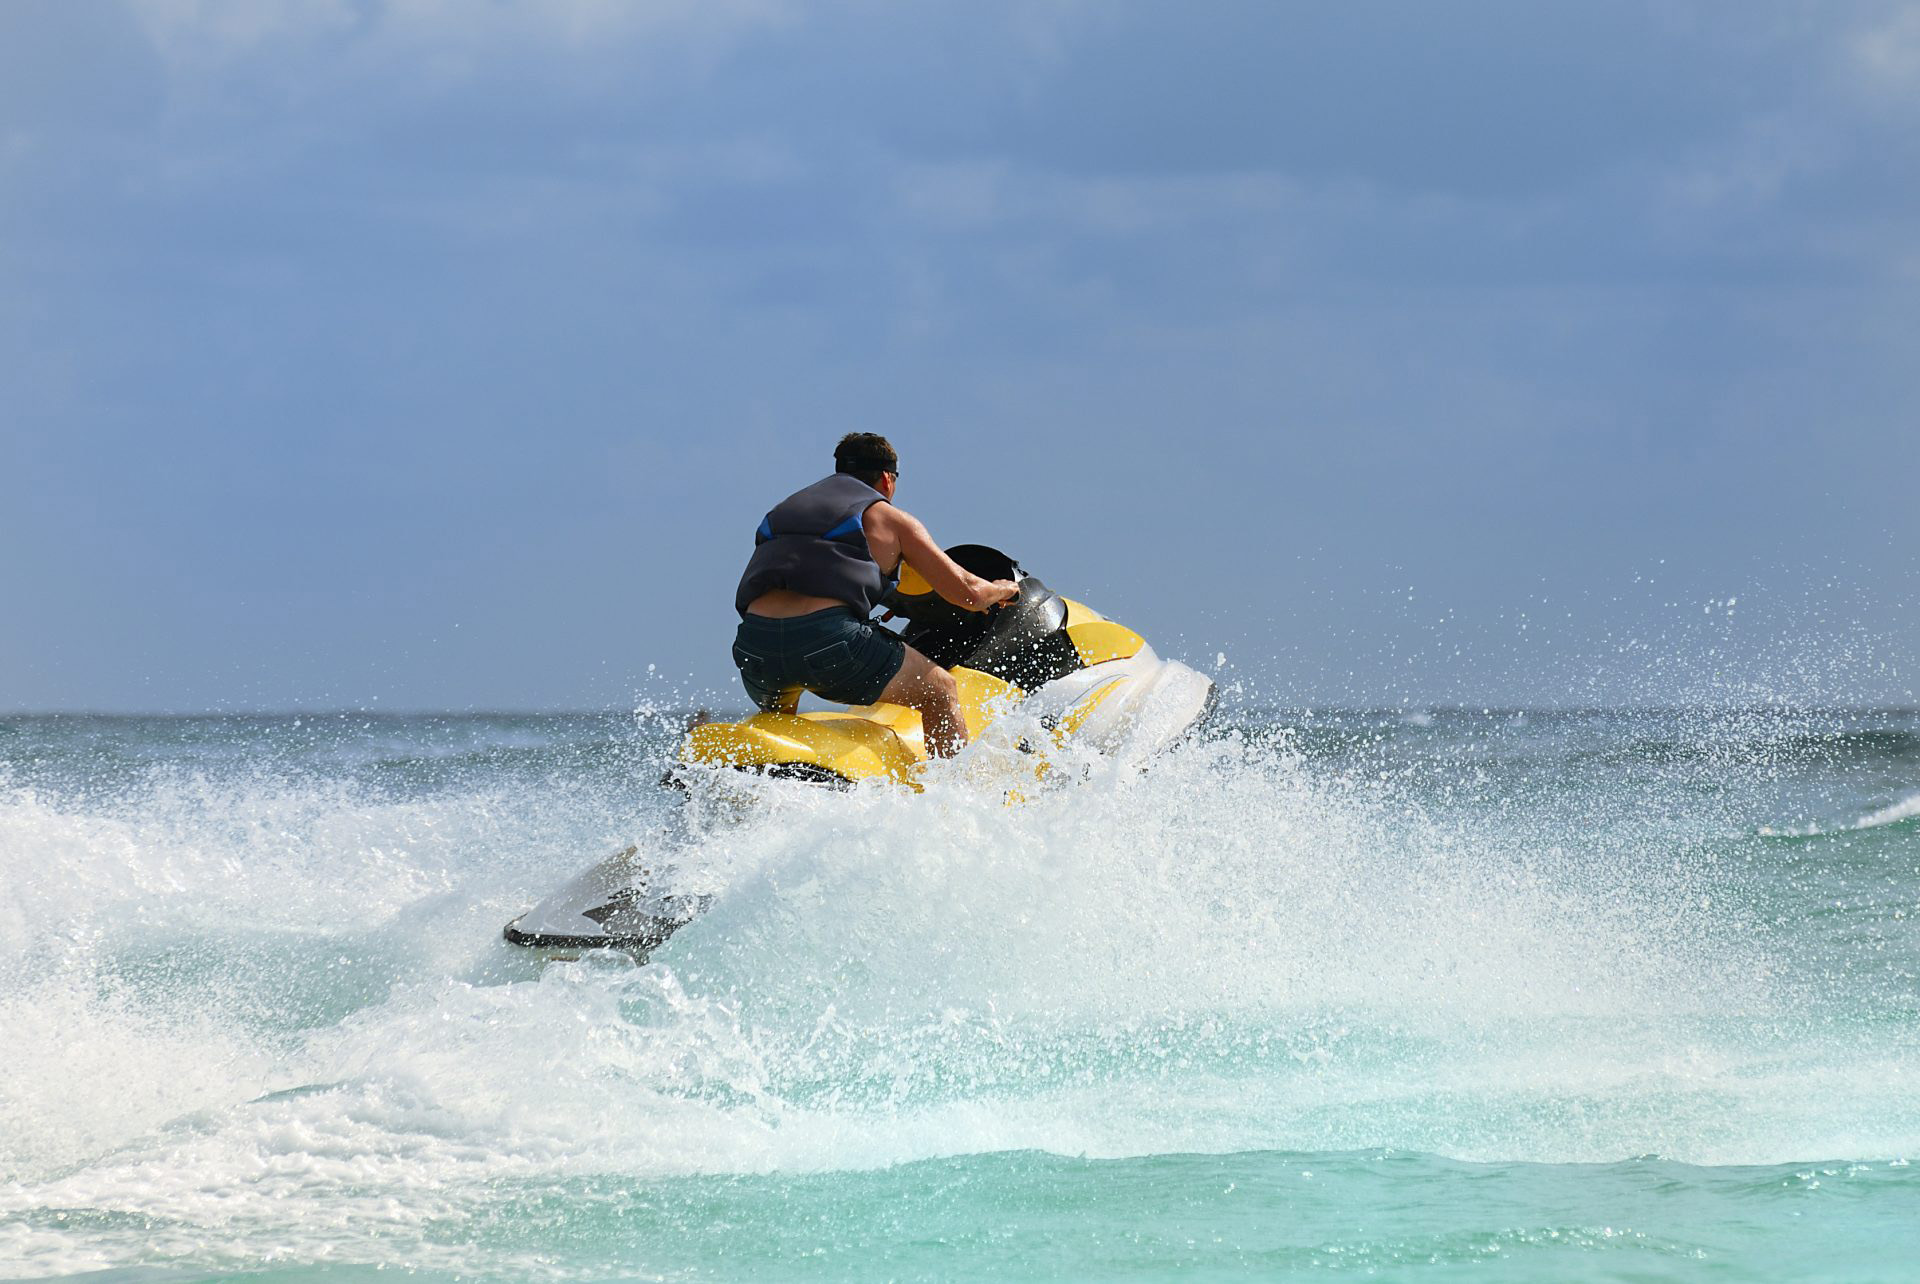 jet-skier jumping a wave